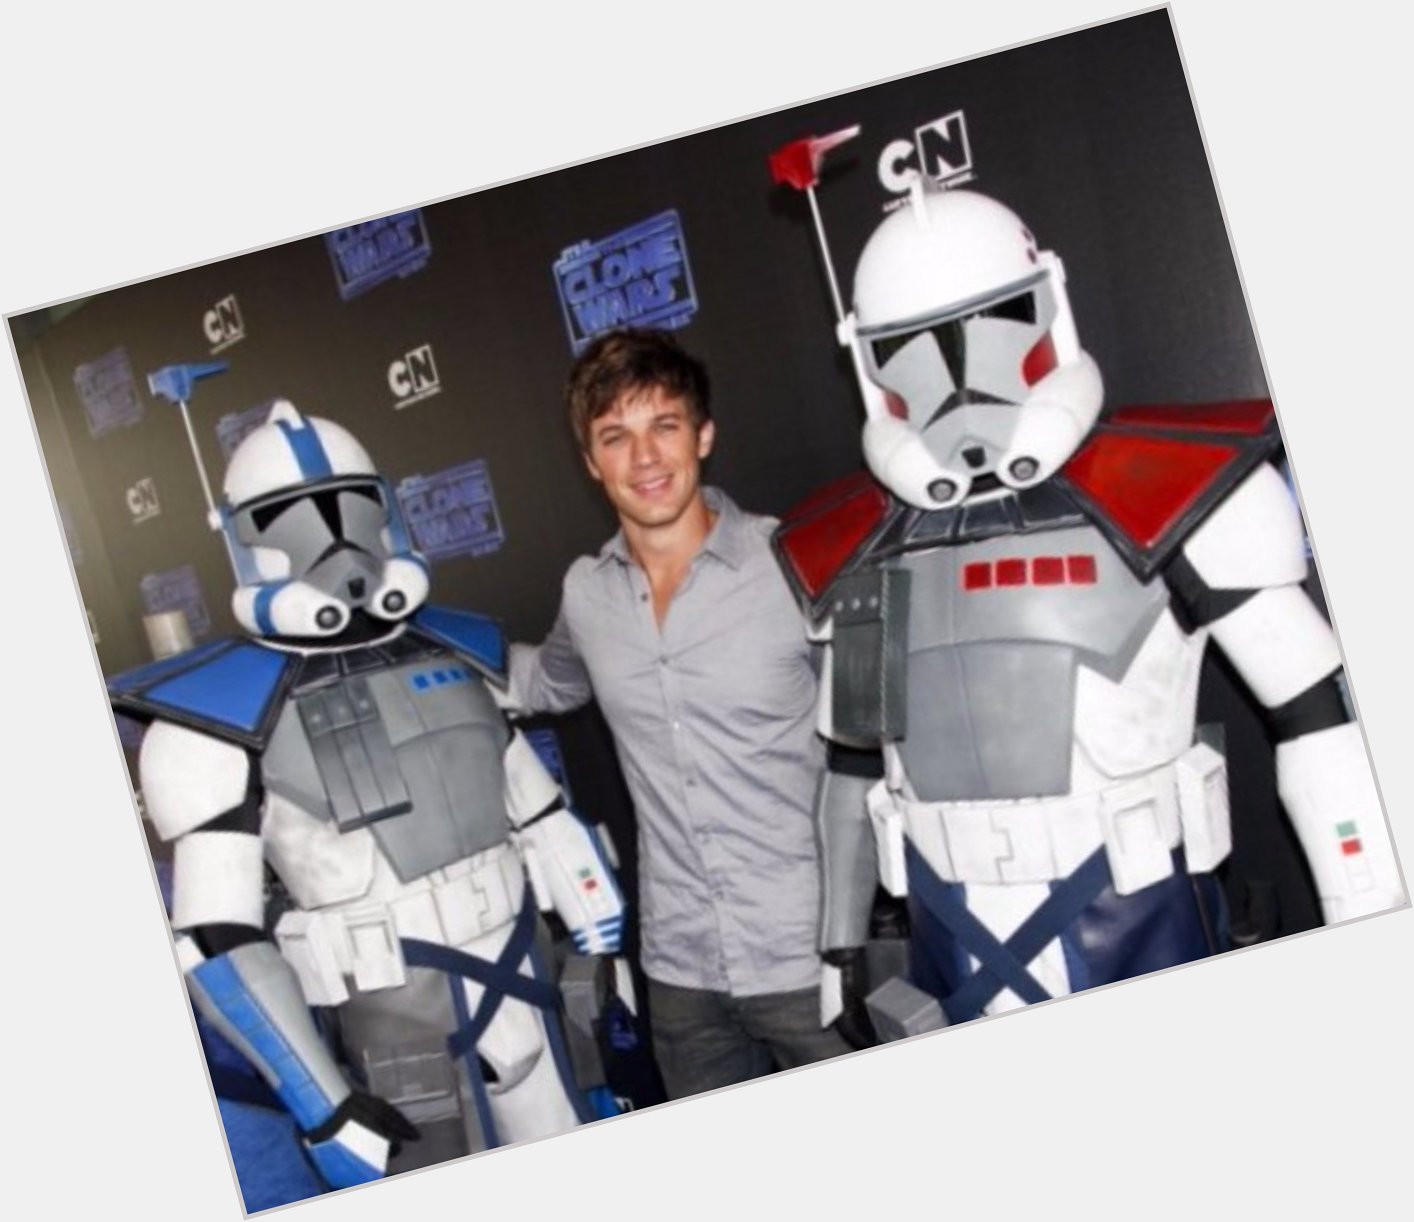 Happy Birthday to Honorary Member Matt Lanter ( May The Force Be With You! 